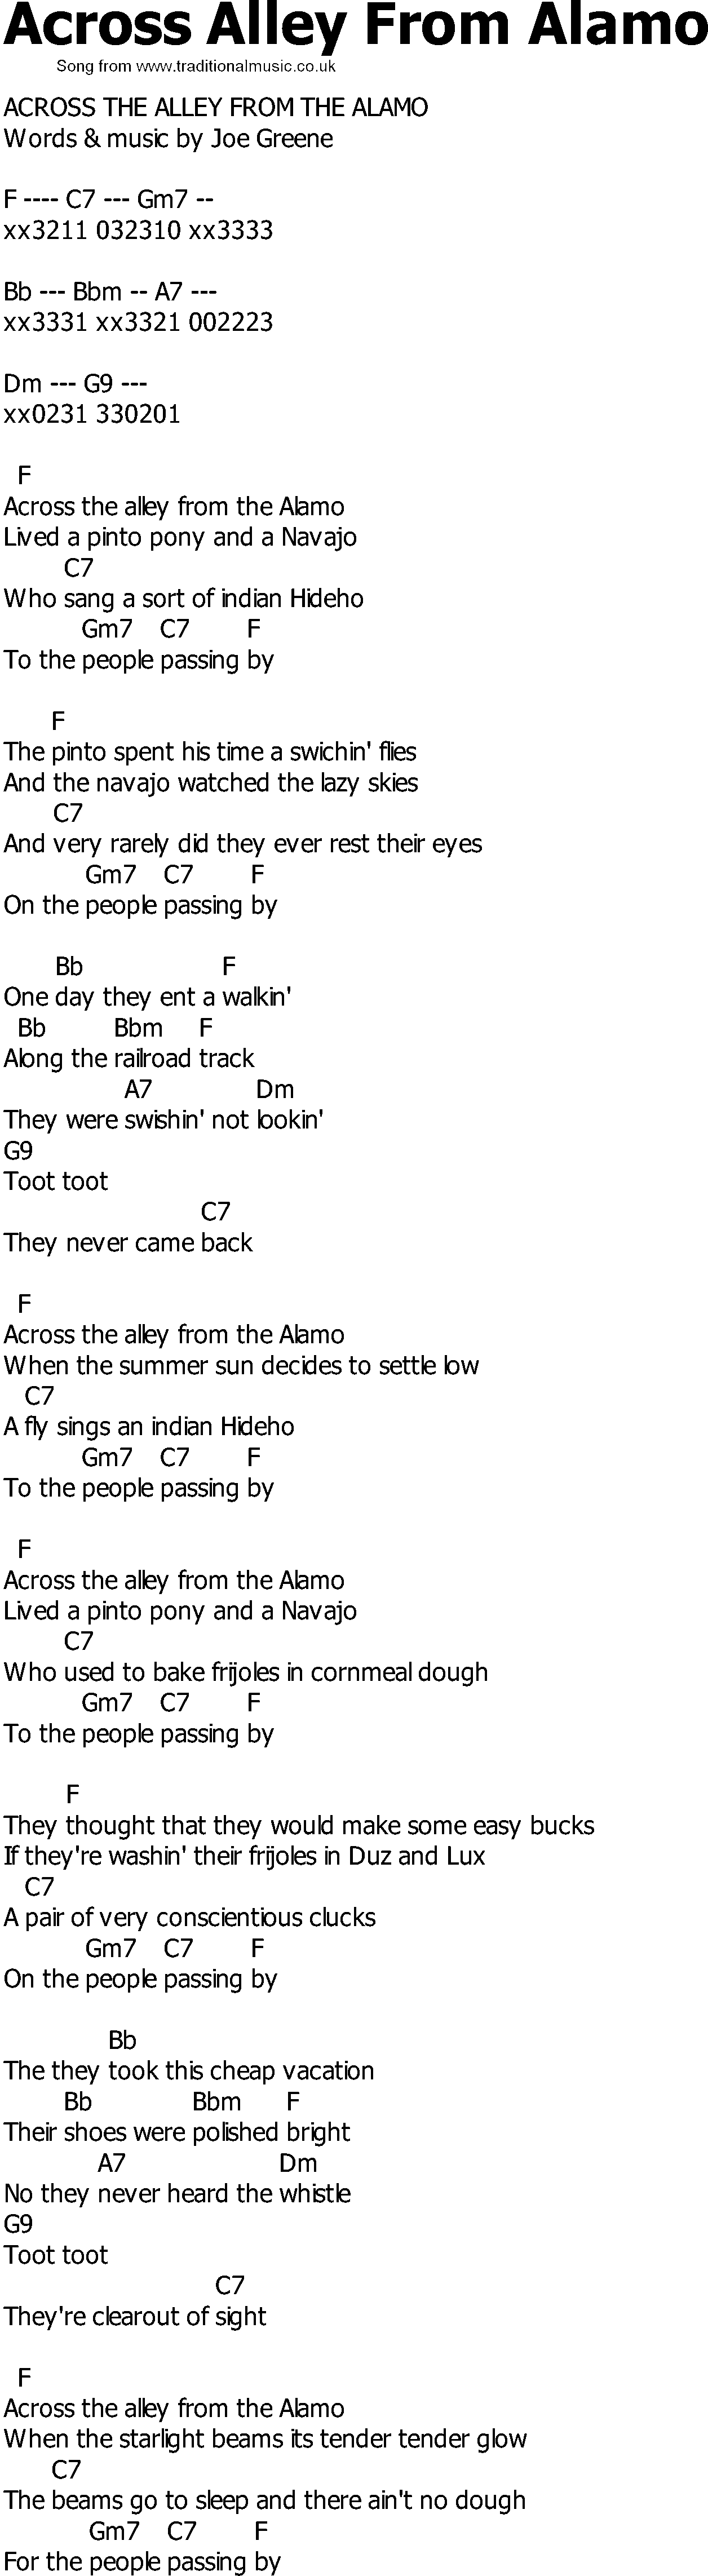 Old Country song lyrics with chords - Across Alley From Alamo